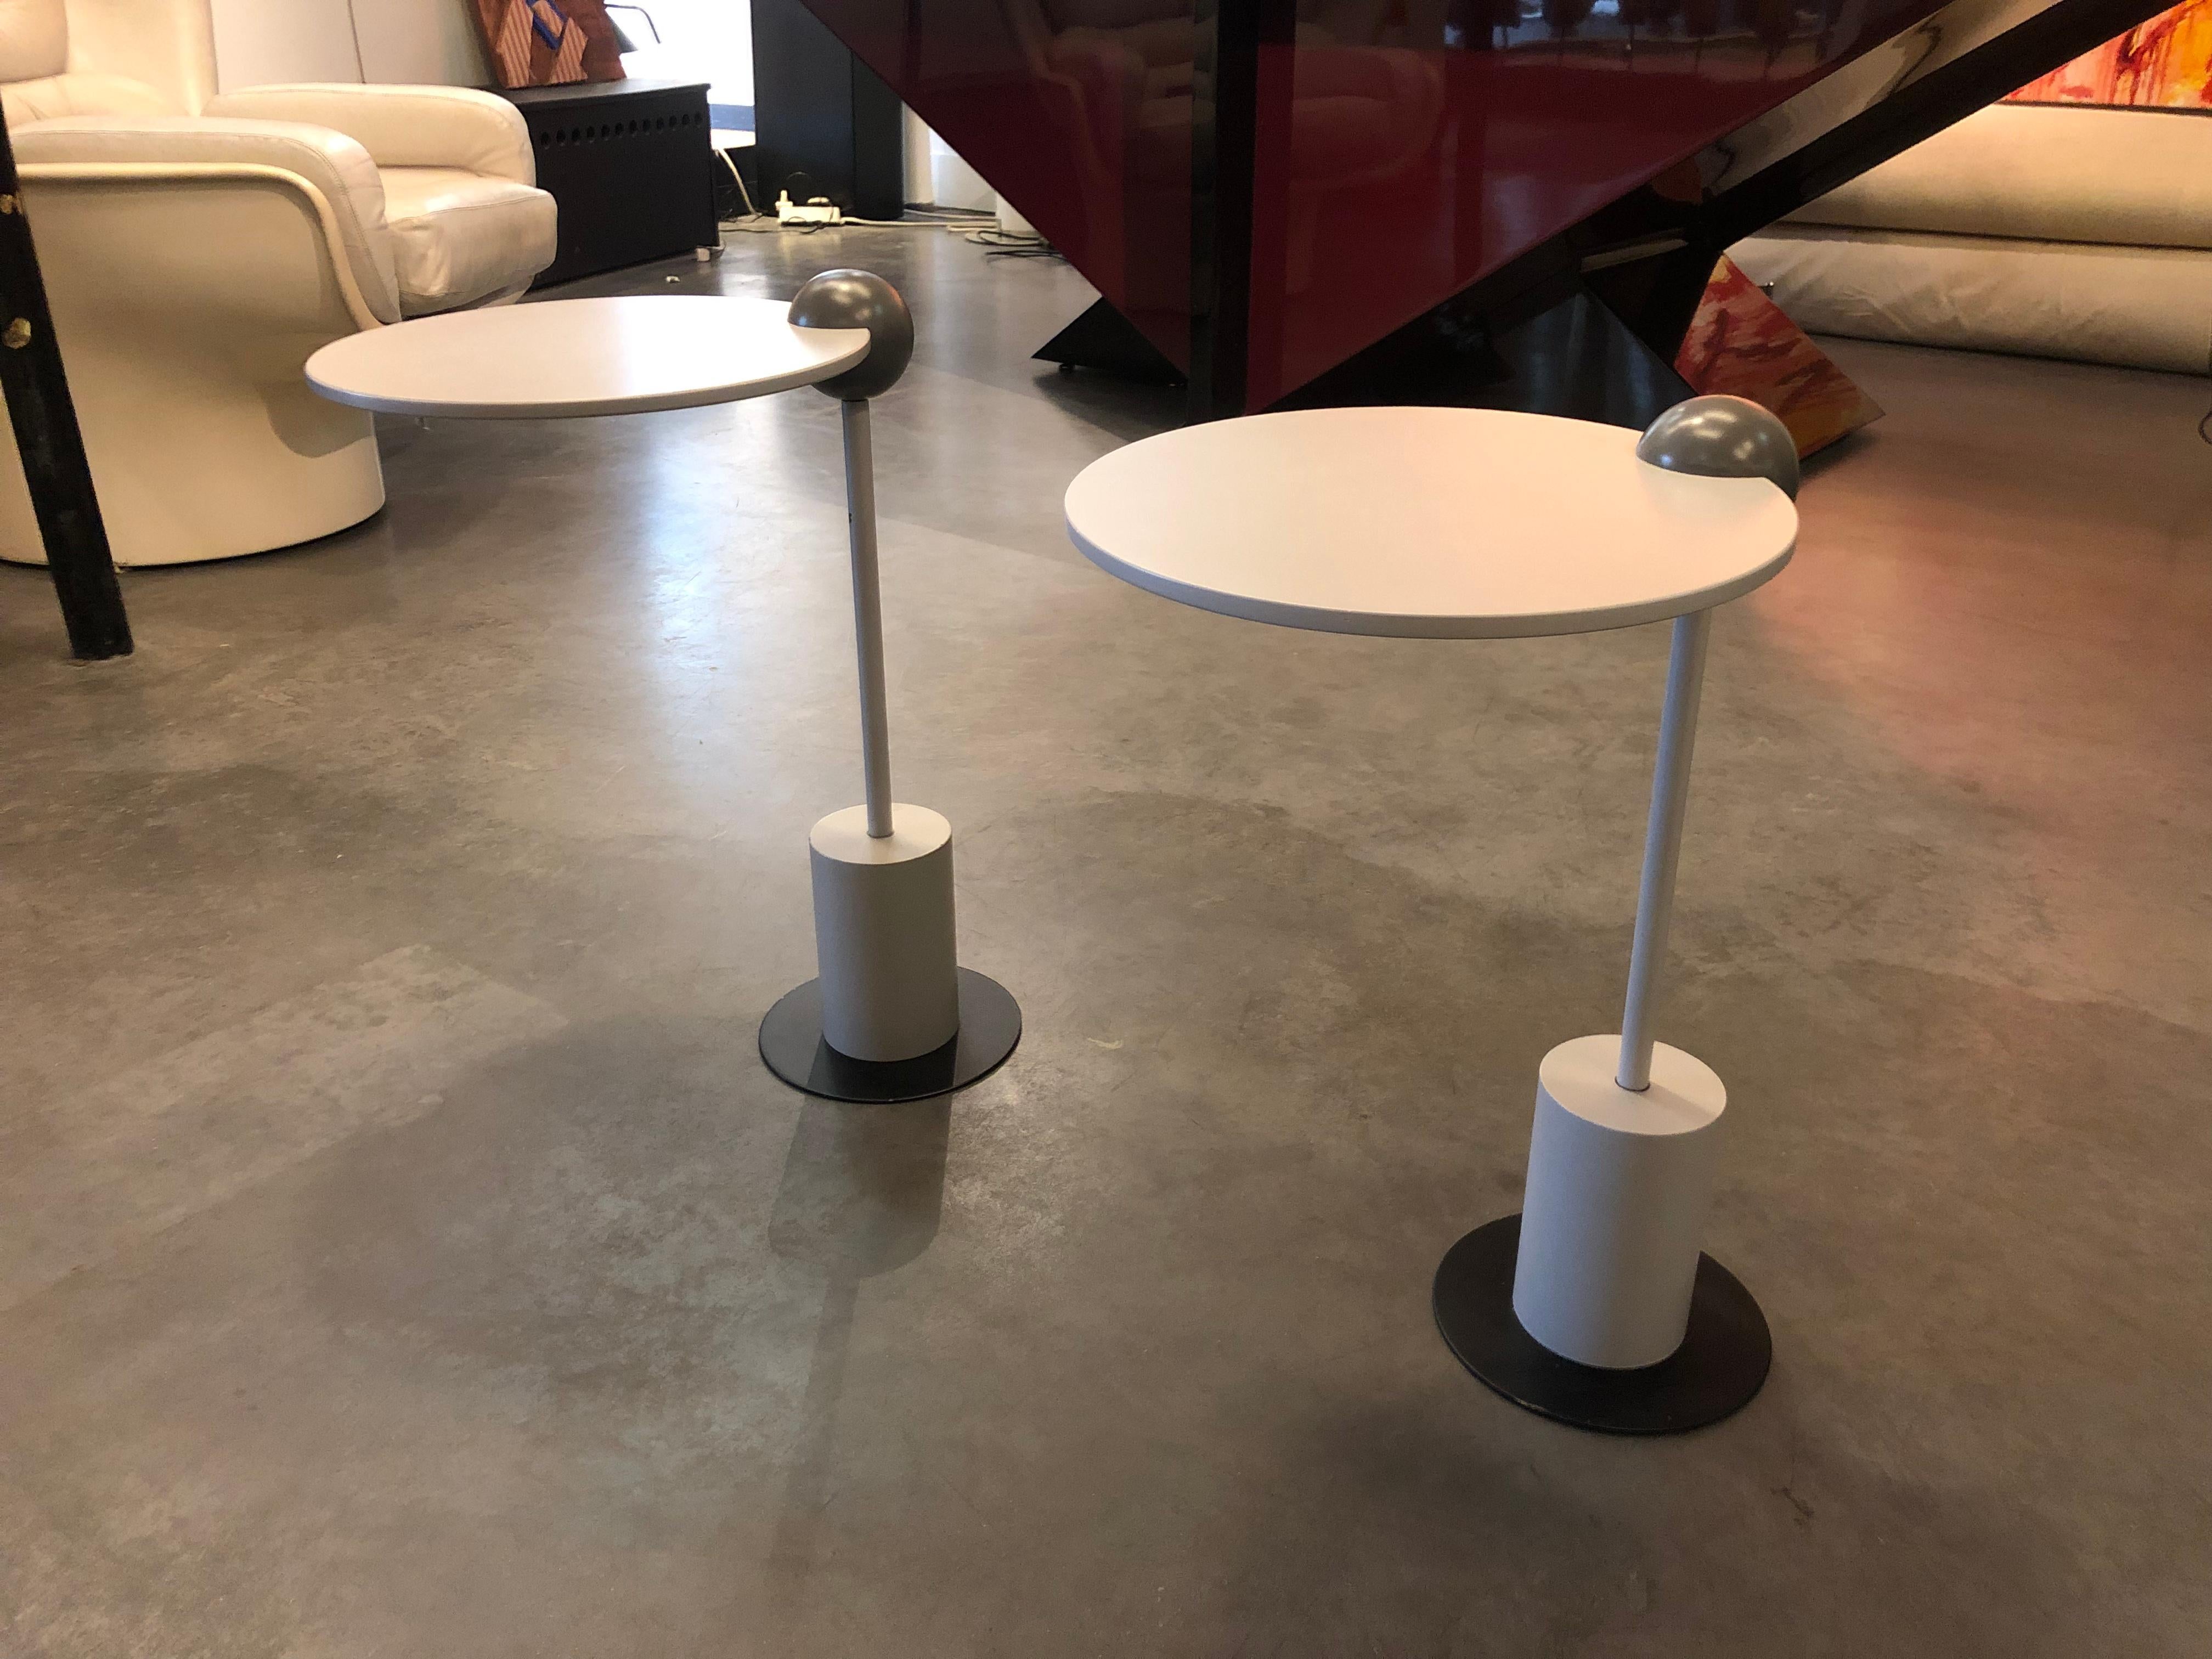 Pair of side tables by Edward Geluk for Arco in 1984
Designed in Memphis style or Post modernism .
Very practical they can be mixed with all style of mid modern century furniture.